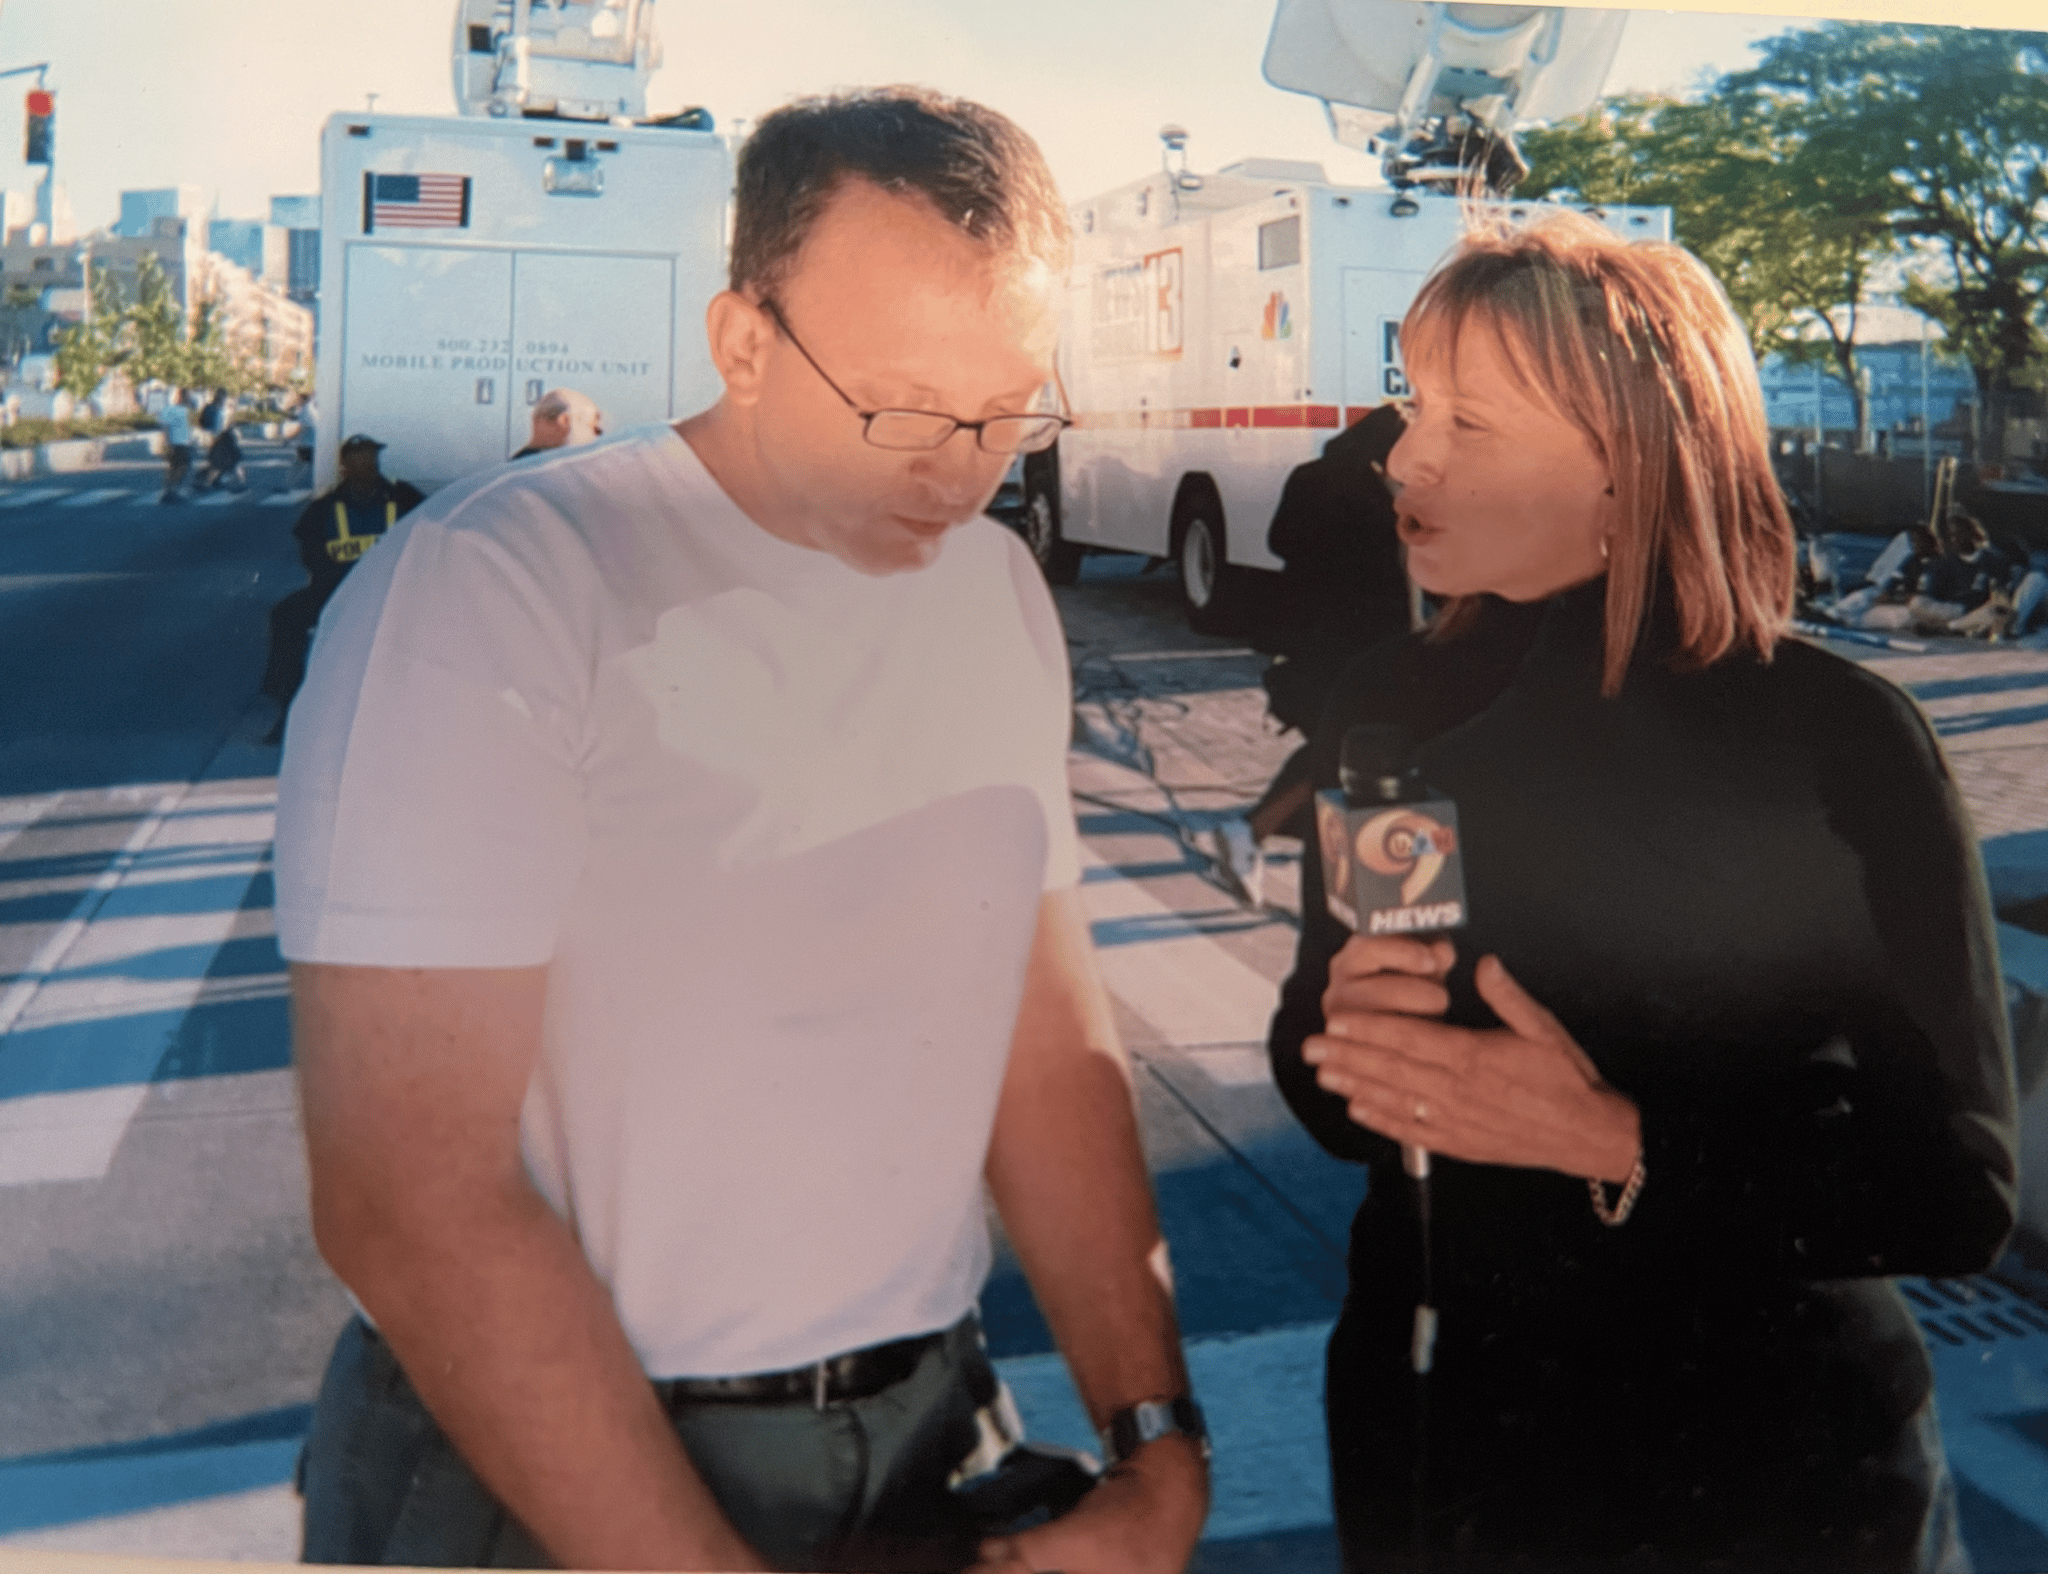 Barbara Nevins Taylor interviewing a man after 9/11